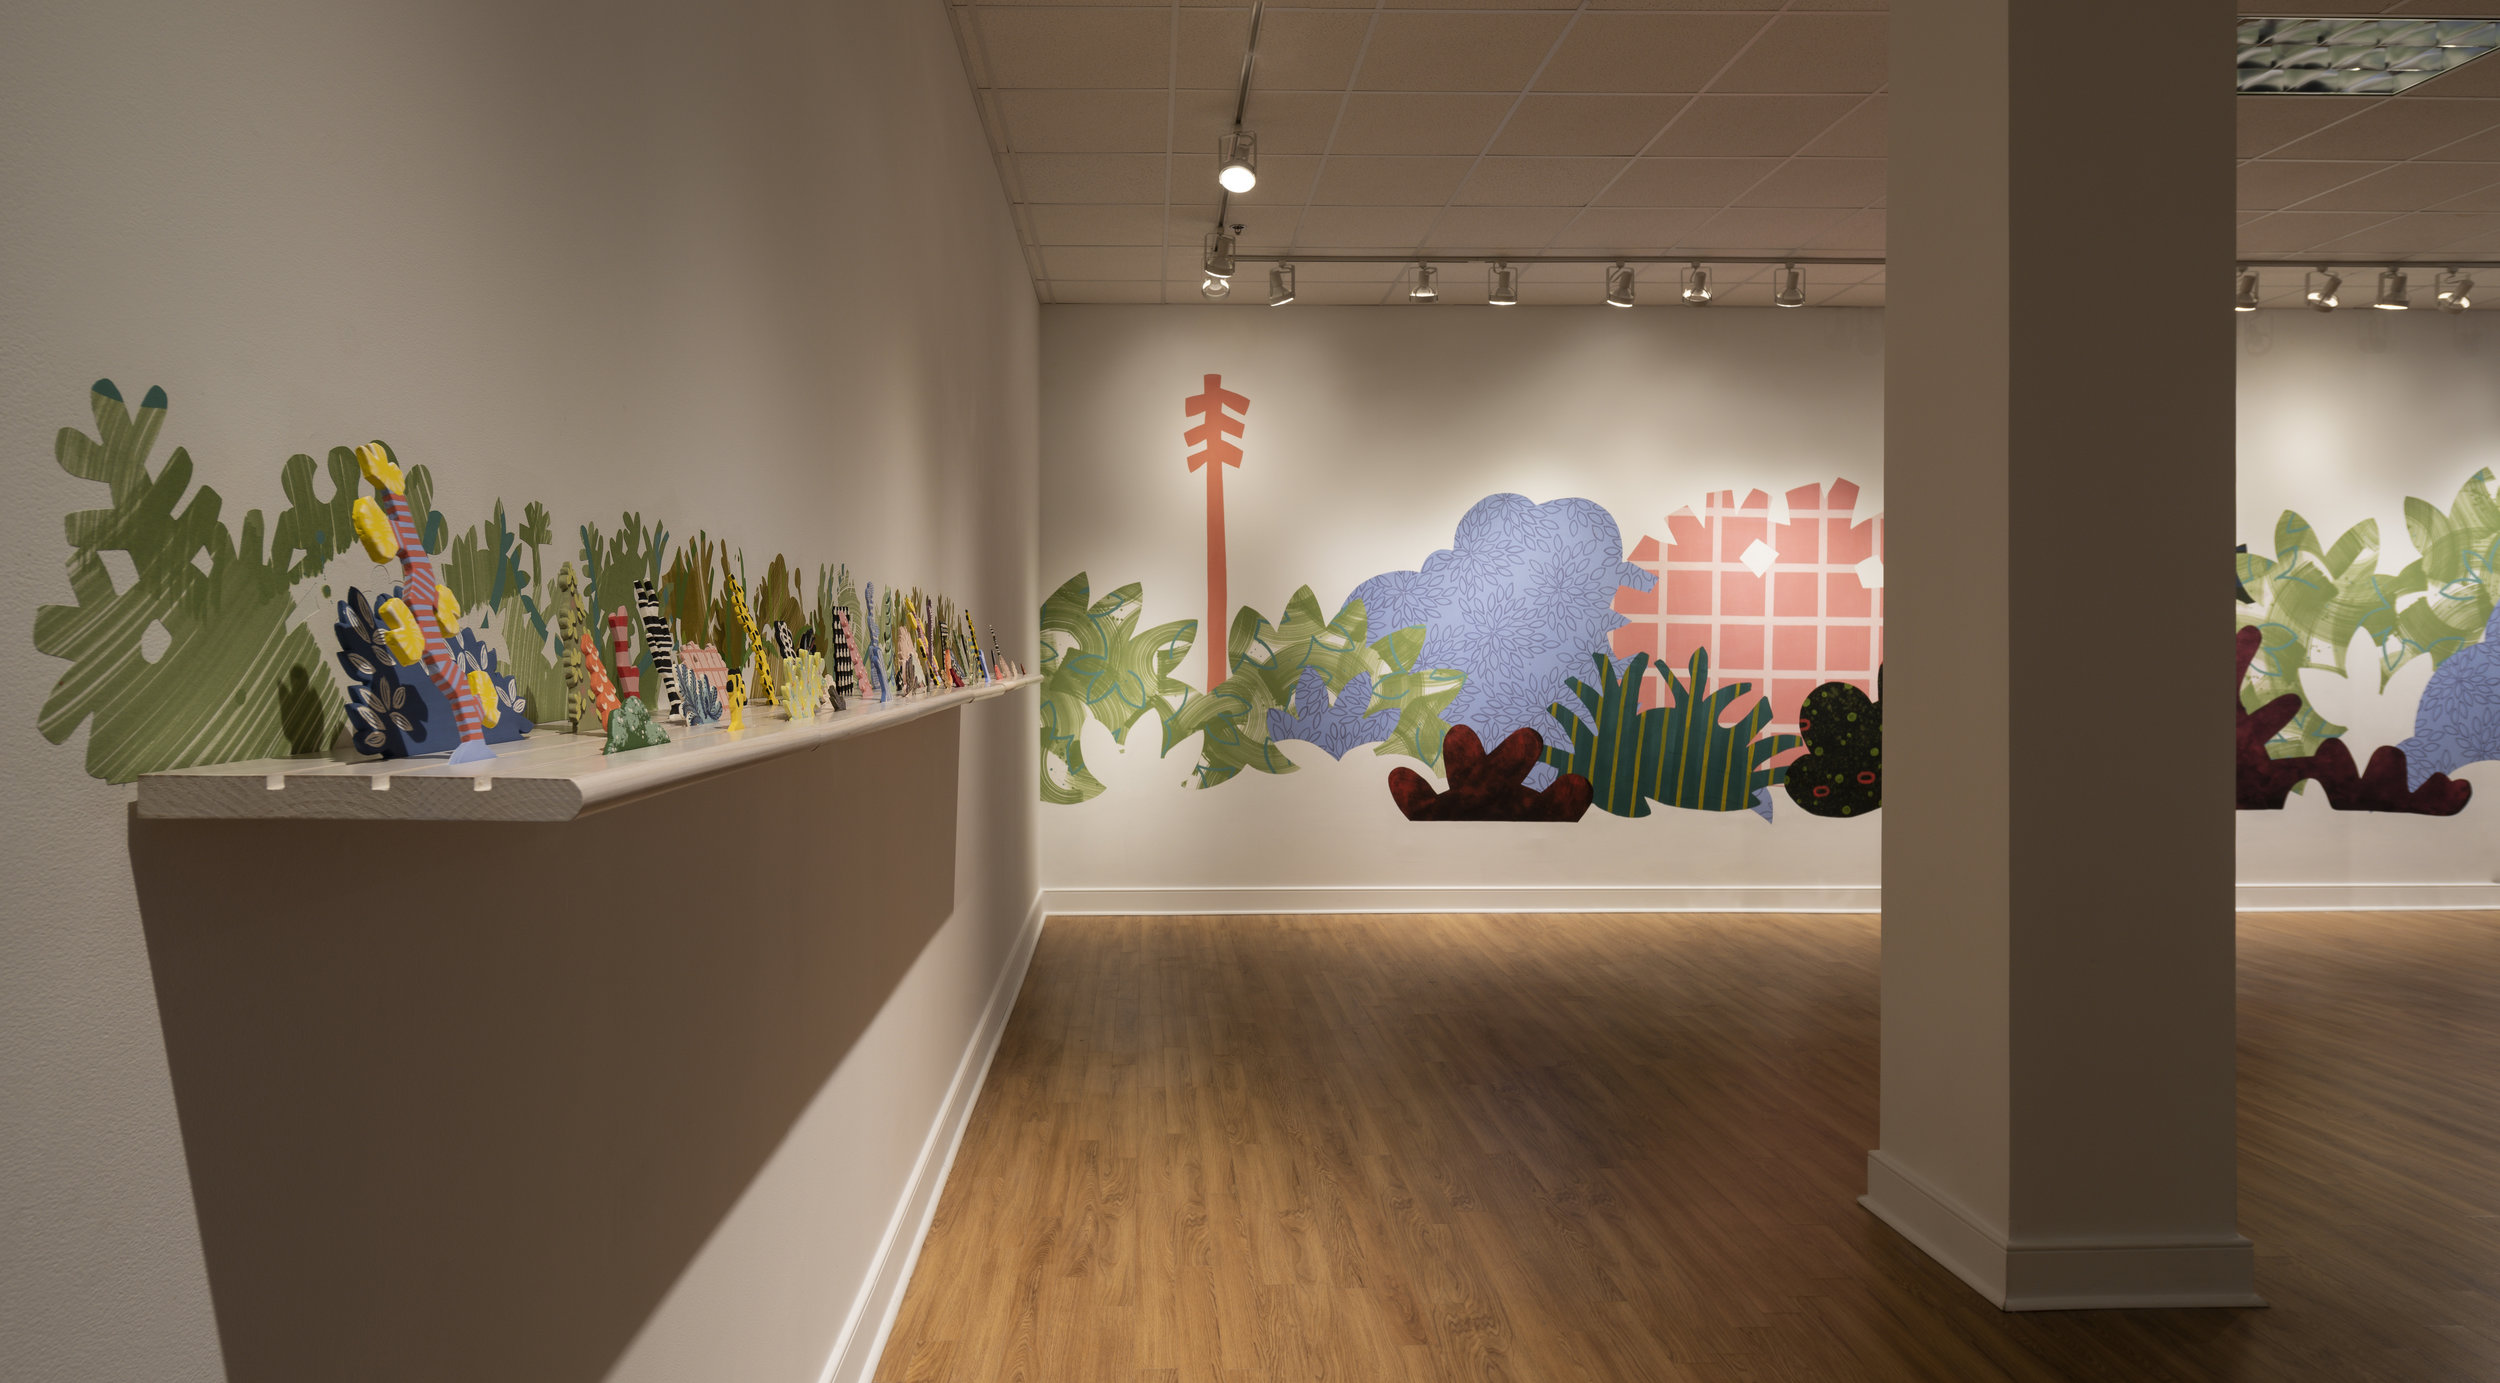  From right to left:     Piecemeal Promenade   (2019) 48ft x 11ft; latex on muslin cut-outs, adhered to wall;     Horizon Allsorts  , (2018) 12ft x 1ft; (6) floating wood shelves, painted muslin, ceramic, underglaze and glaze 